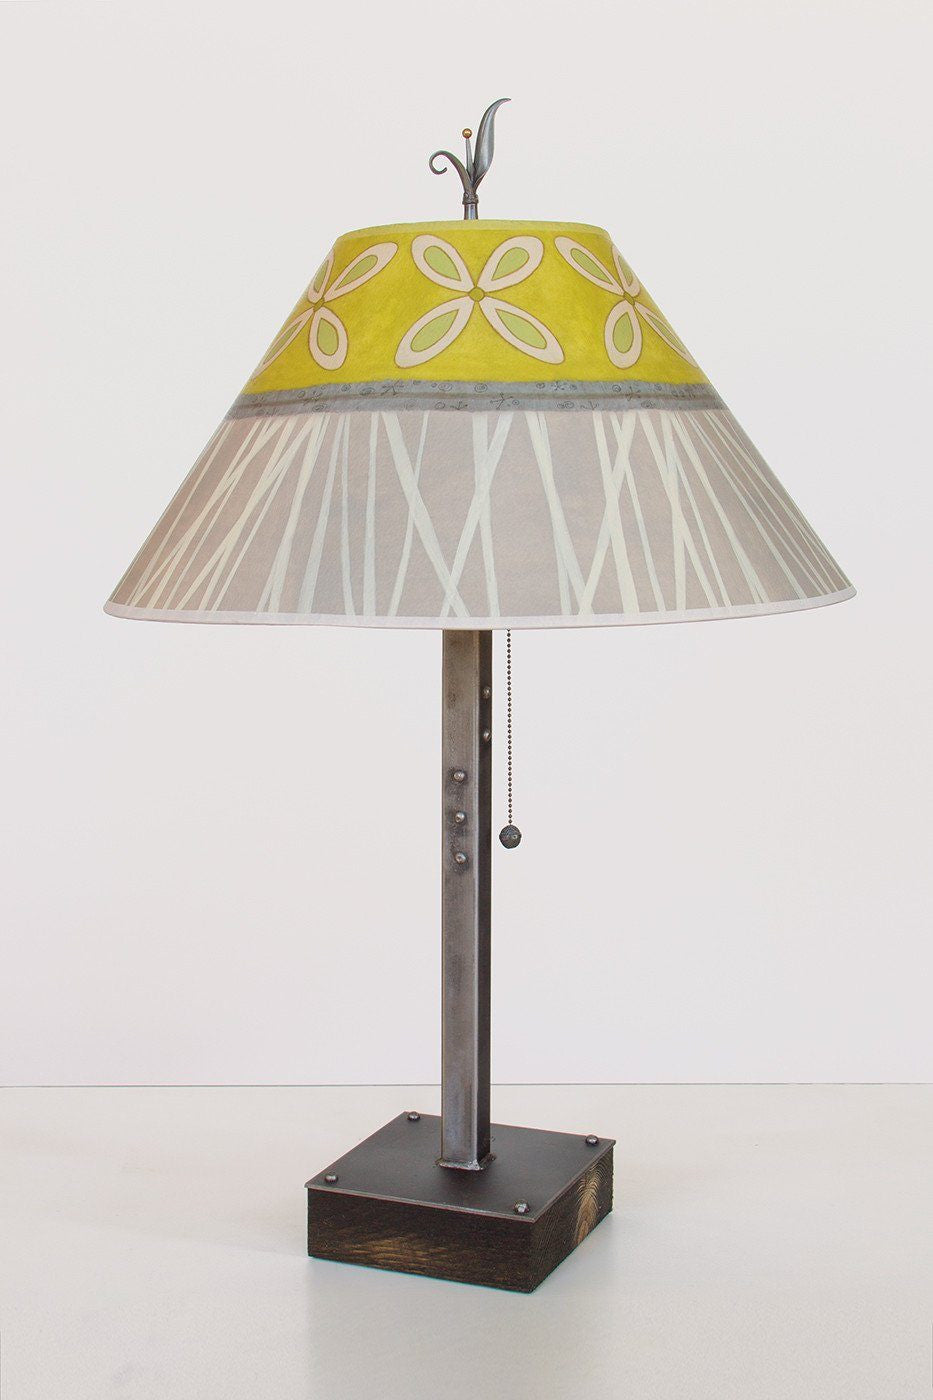 Janna Ugone &amp; Co Table Lamps Steel Table Lamp on Wood with Large Conical Shade in Kiwi